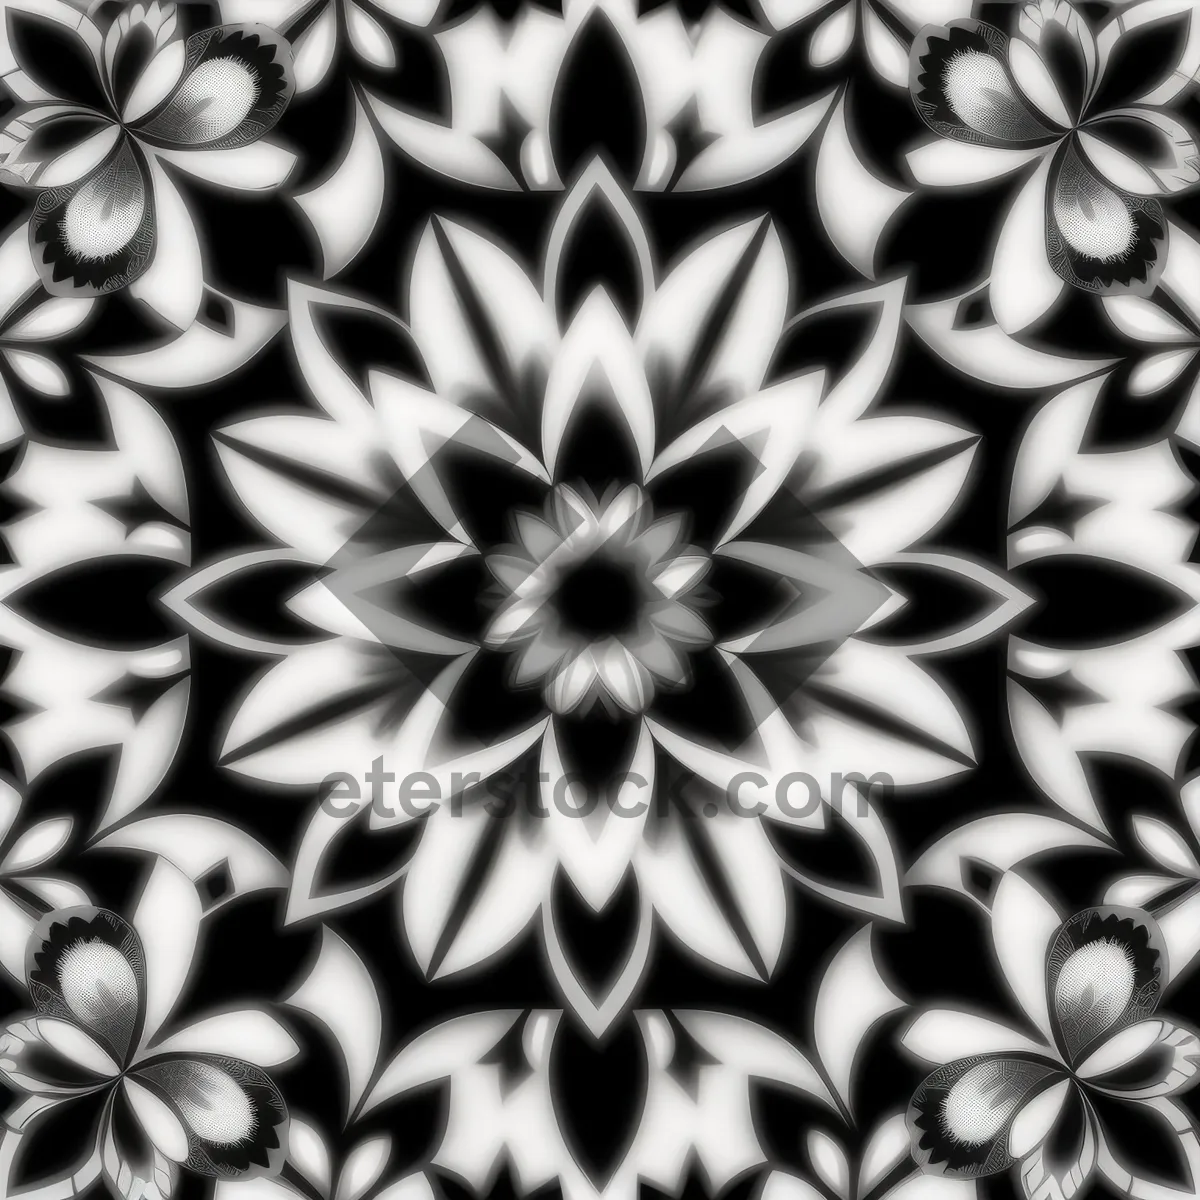 Picture of Floral Retro Wallpaper Design with Arabesque Pattern